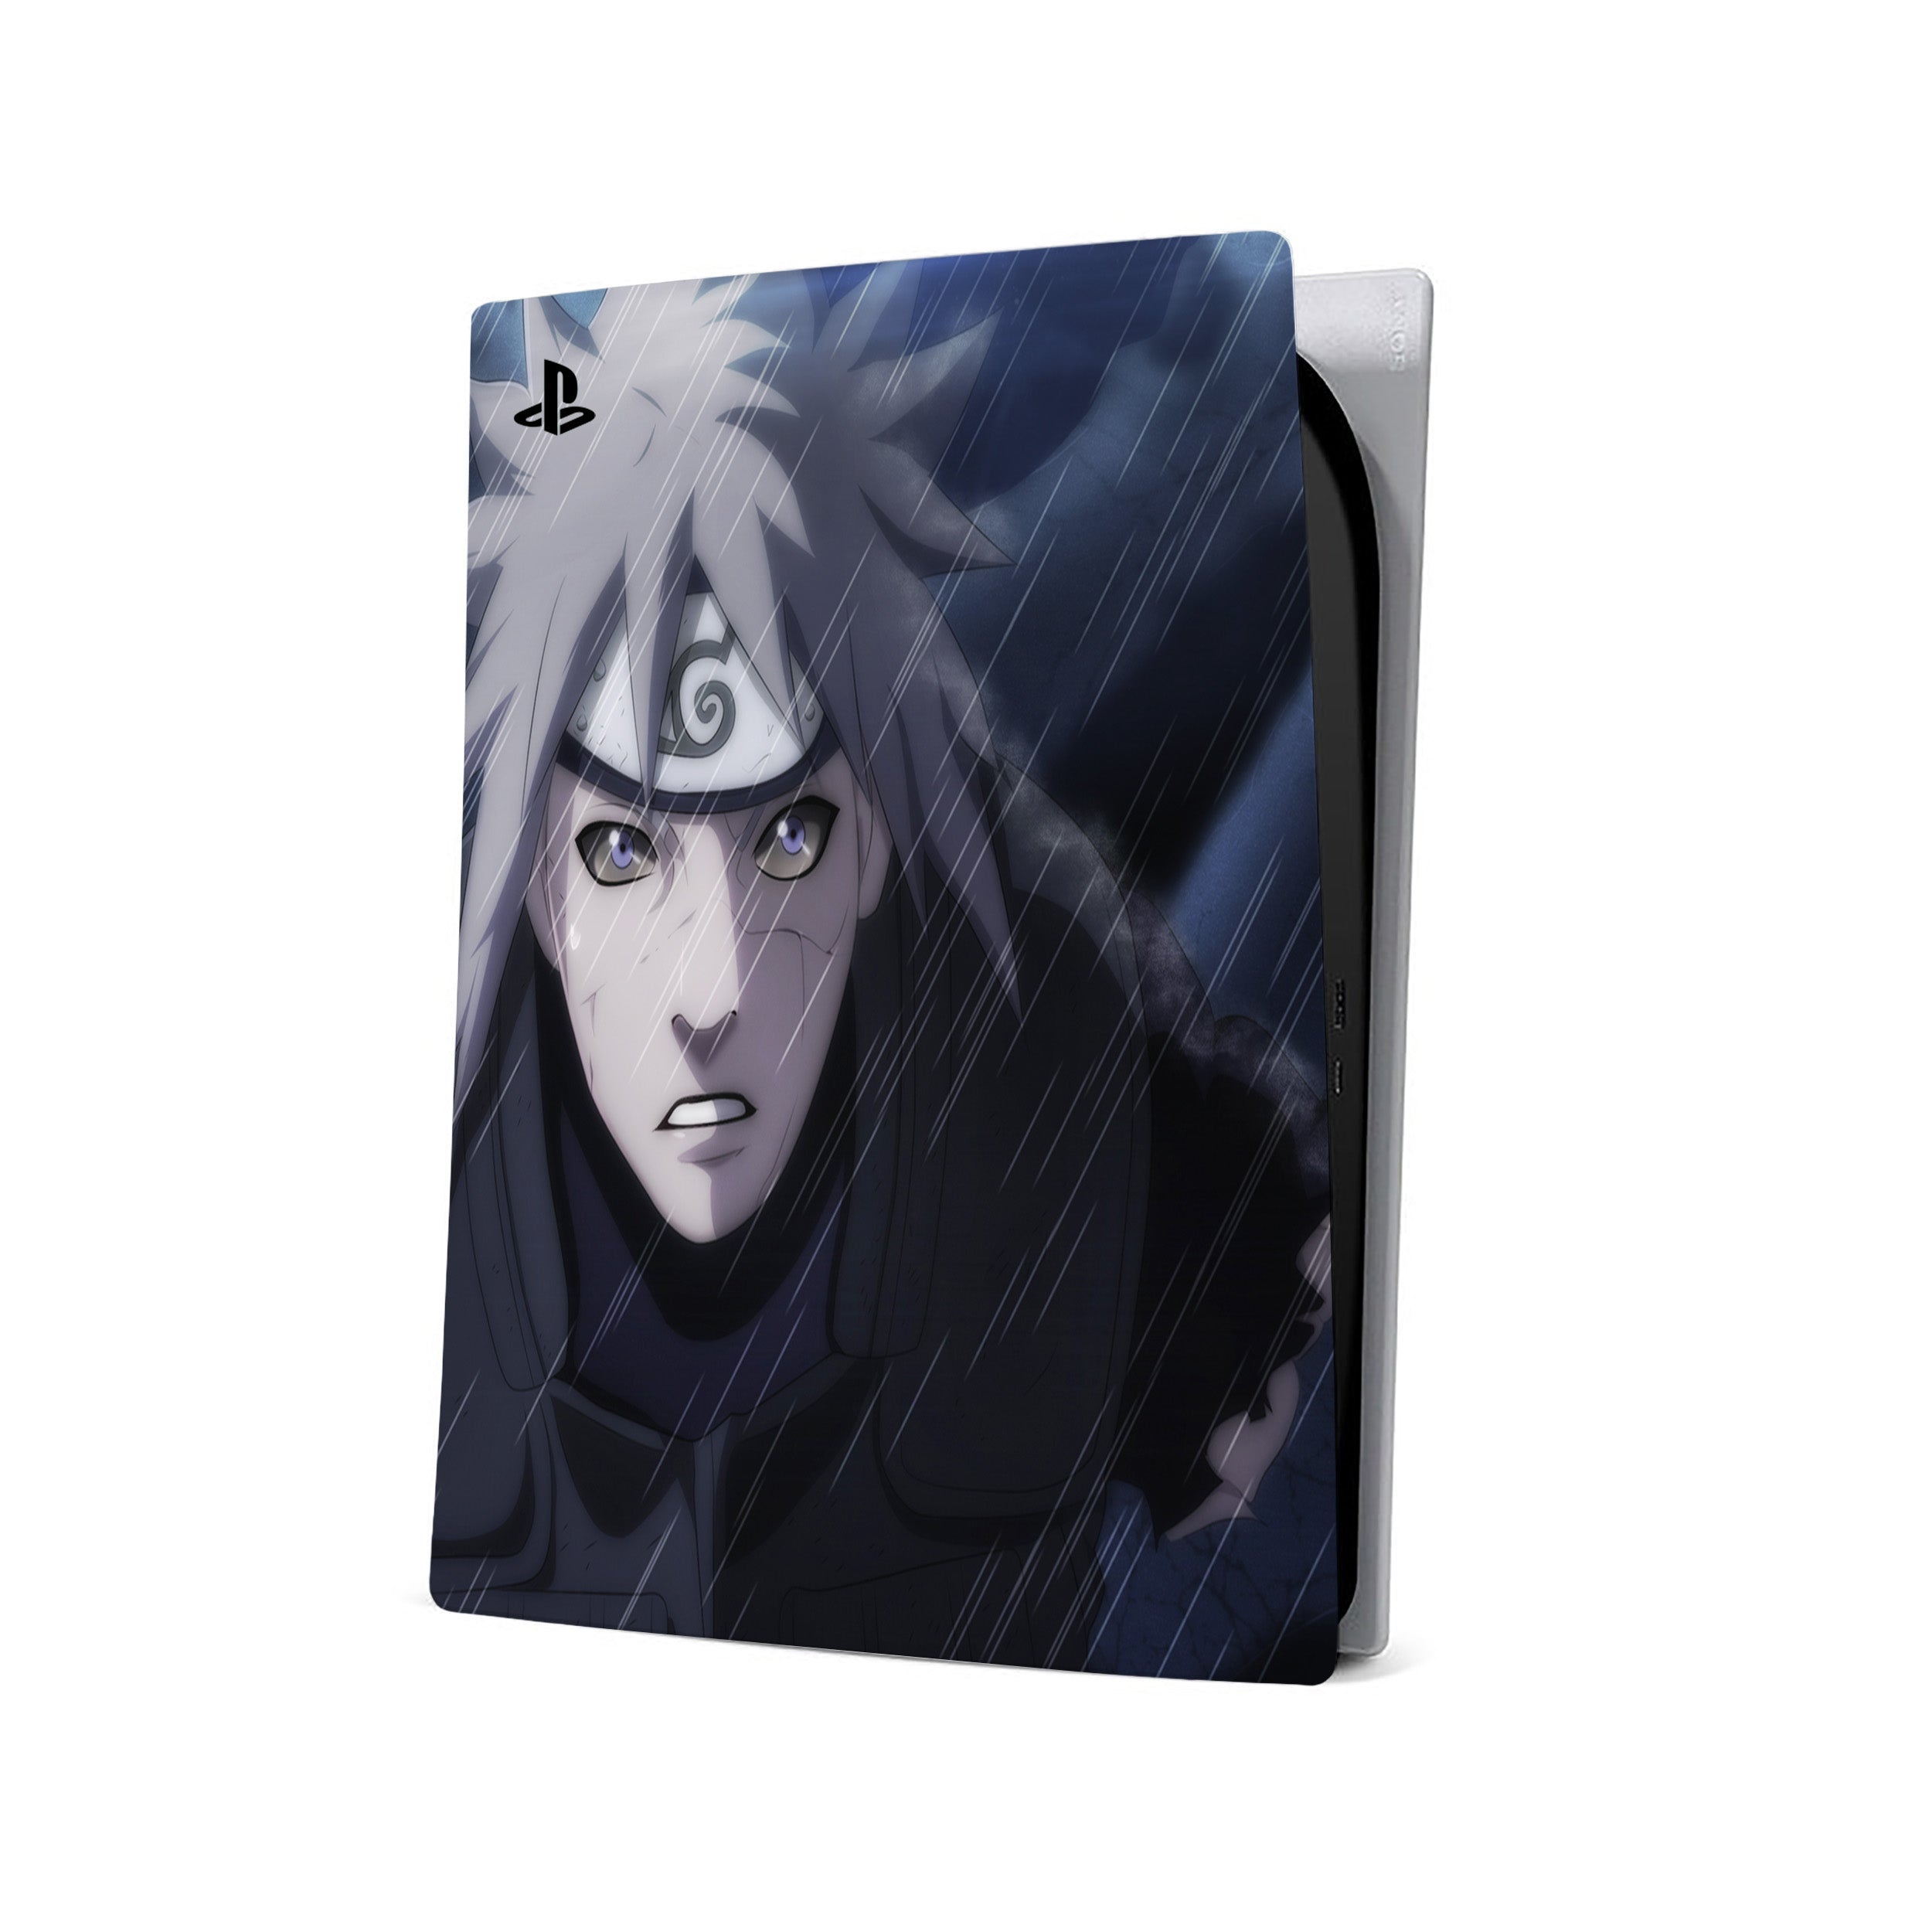 A video game skin featuring a Naruto Minato design for the PS5.